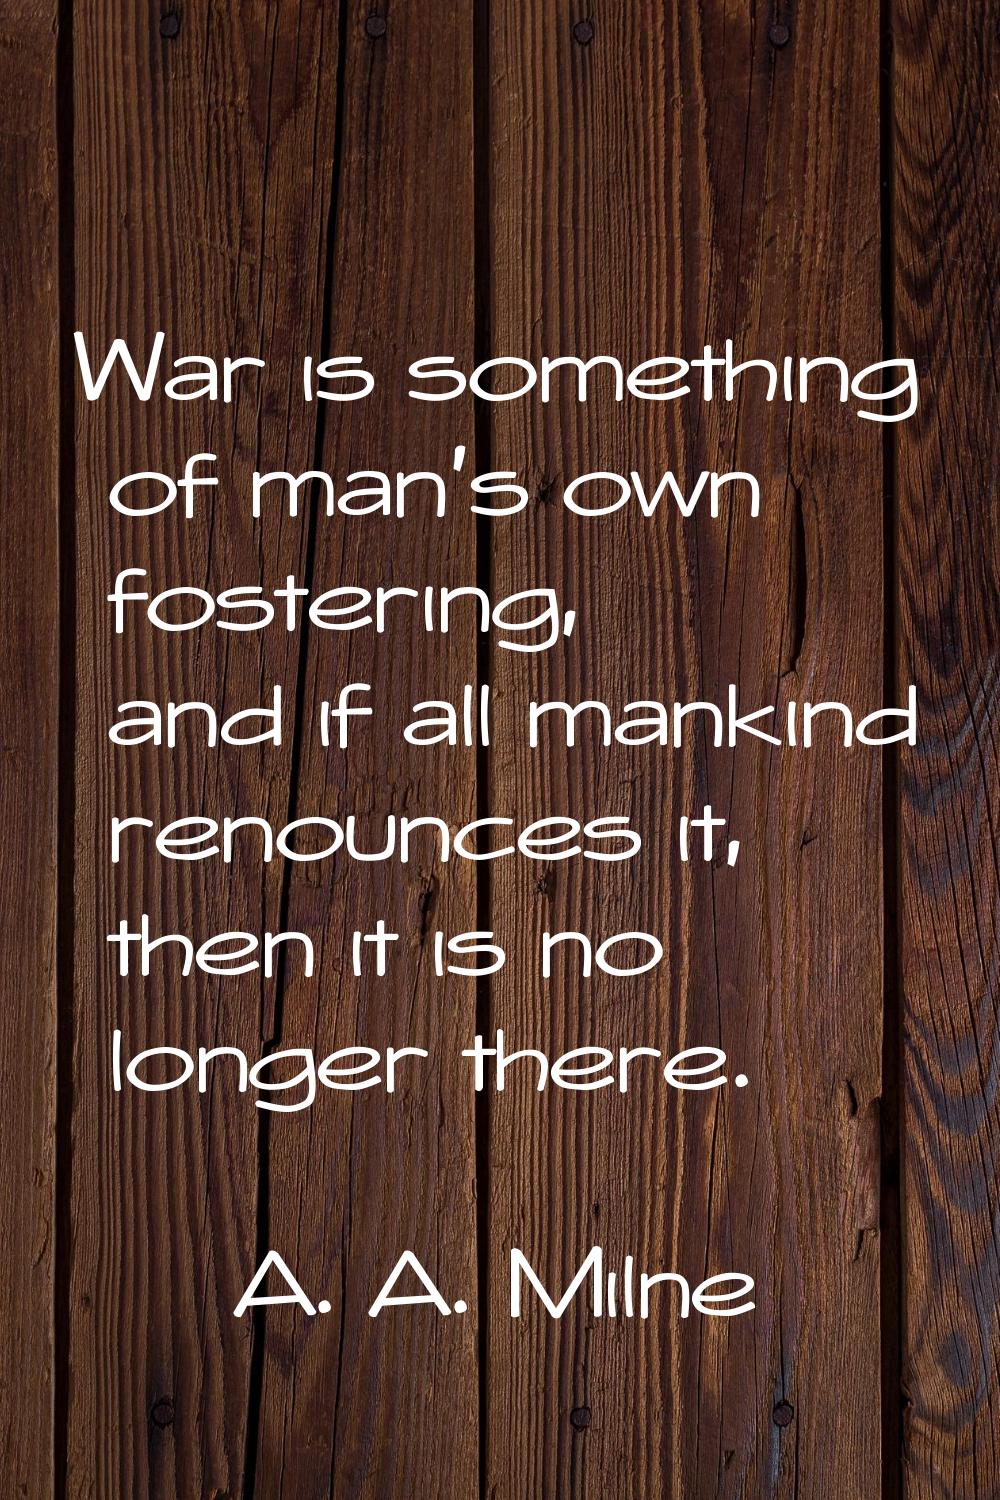 War is something of man's own fostering, and if all mankind renounces it, then it is no longer ther